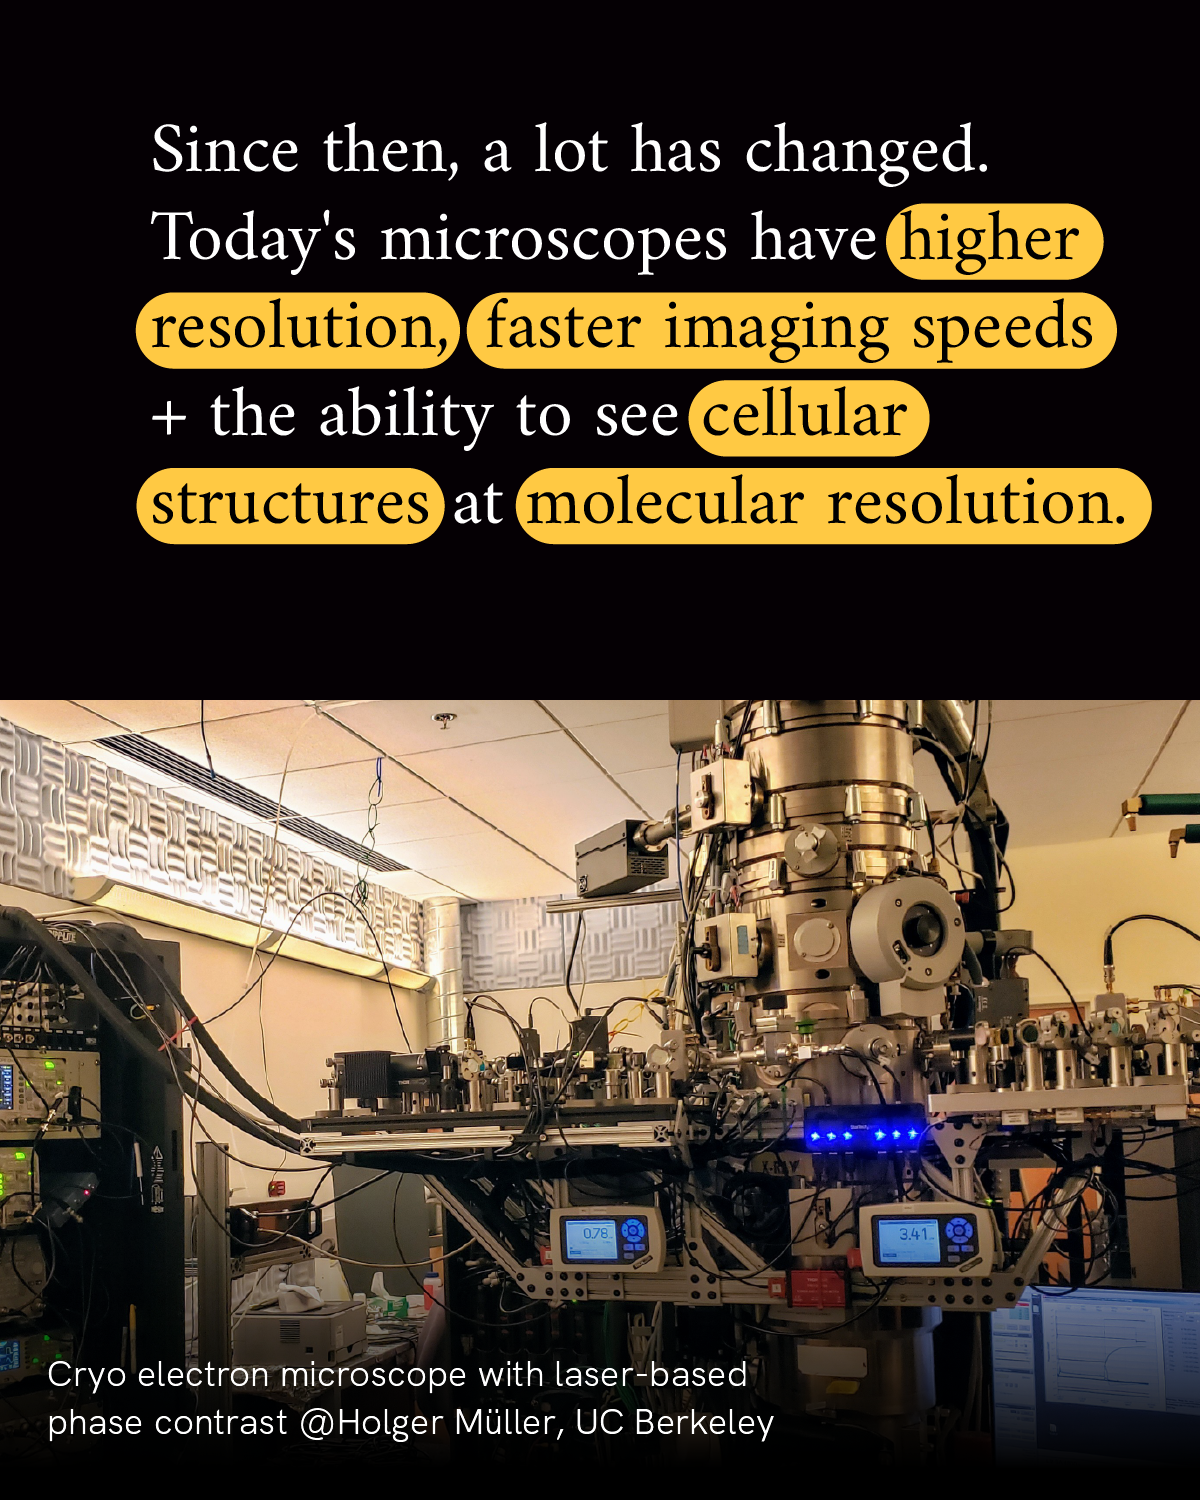 Infographic reads “Since then, a lot has changed. Today’s microscopes have higher resolution, faster imaging speeds + the ability to see cellular structures at molecular resolution.” A photograph of a large microscope that fills the room with wires and tubes connecting running throughout the machine accompanies the text.